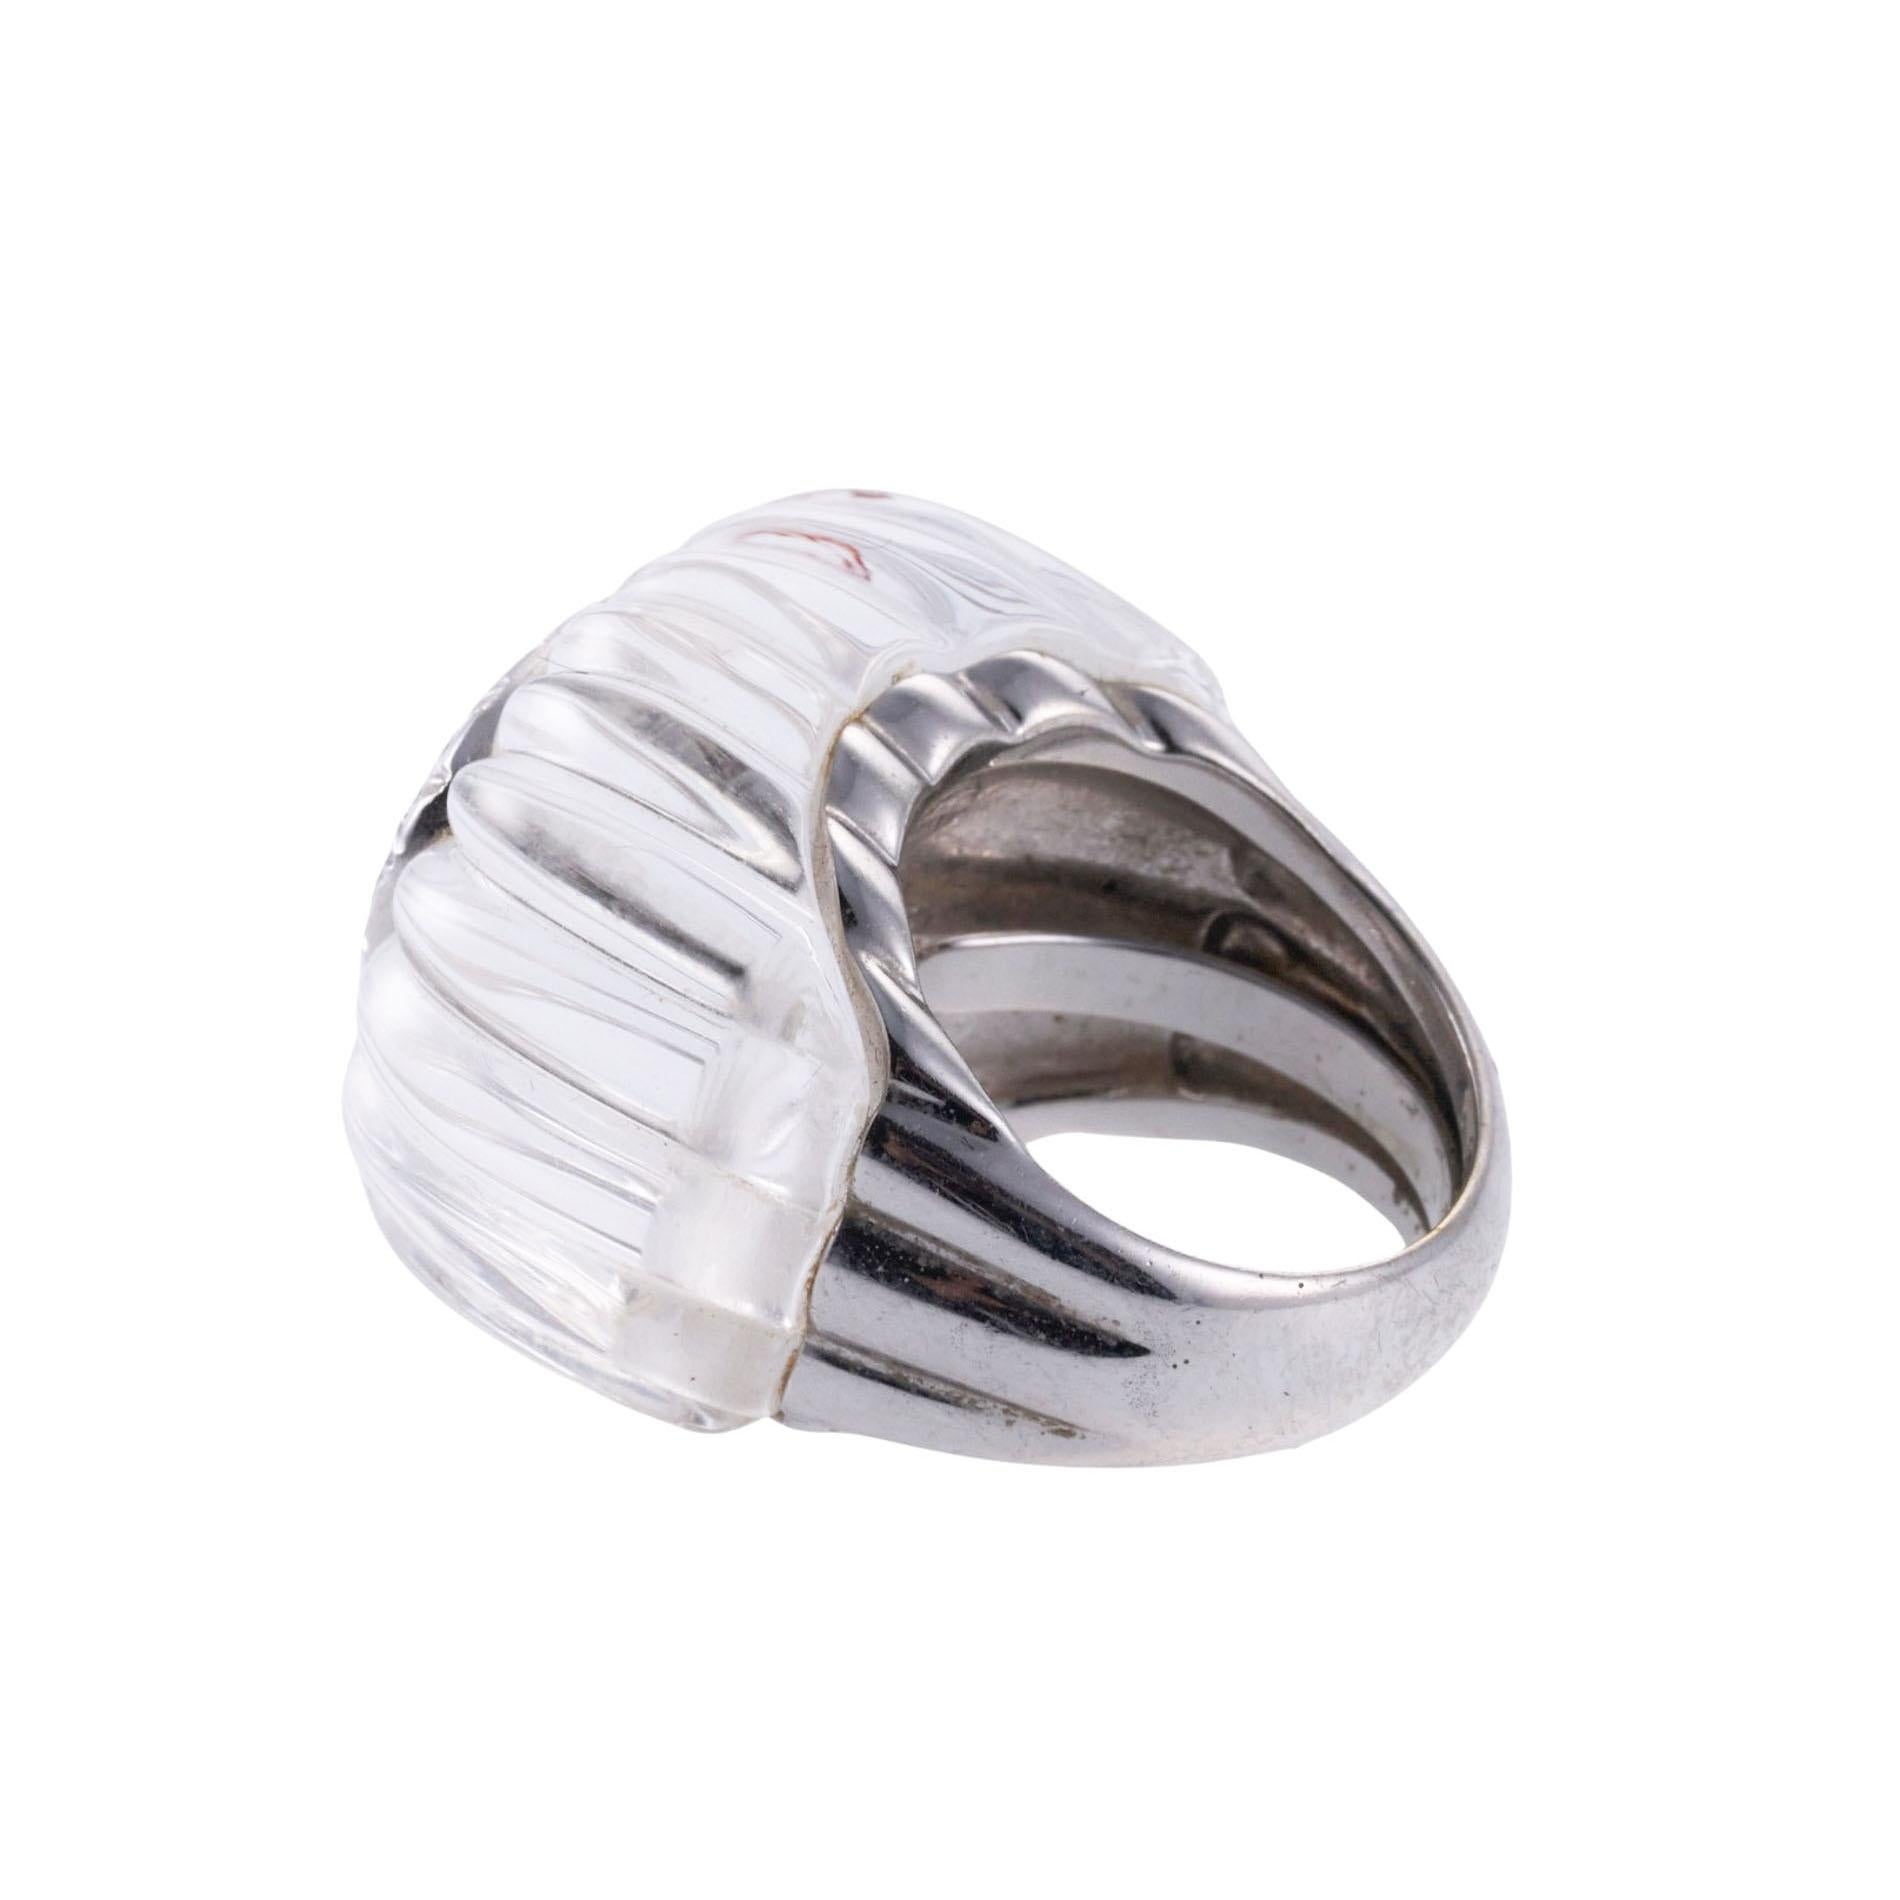 David Webb 18K white gold and platinum ring, set with carved crystal top and approx. 1.00ctw in H/VS-SI diamonds. Ring size 6.5, top measures 21mm x 25mm. Weight is 31.2 grams. Marked: Webb, 18k,900pt.